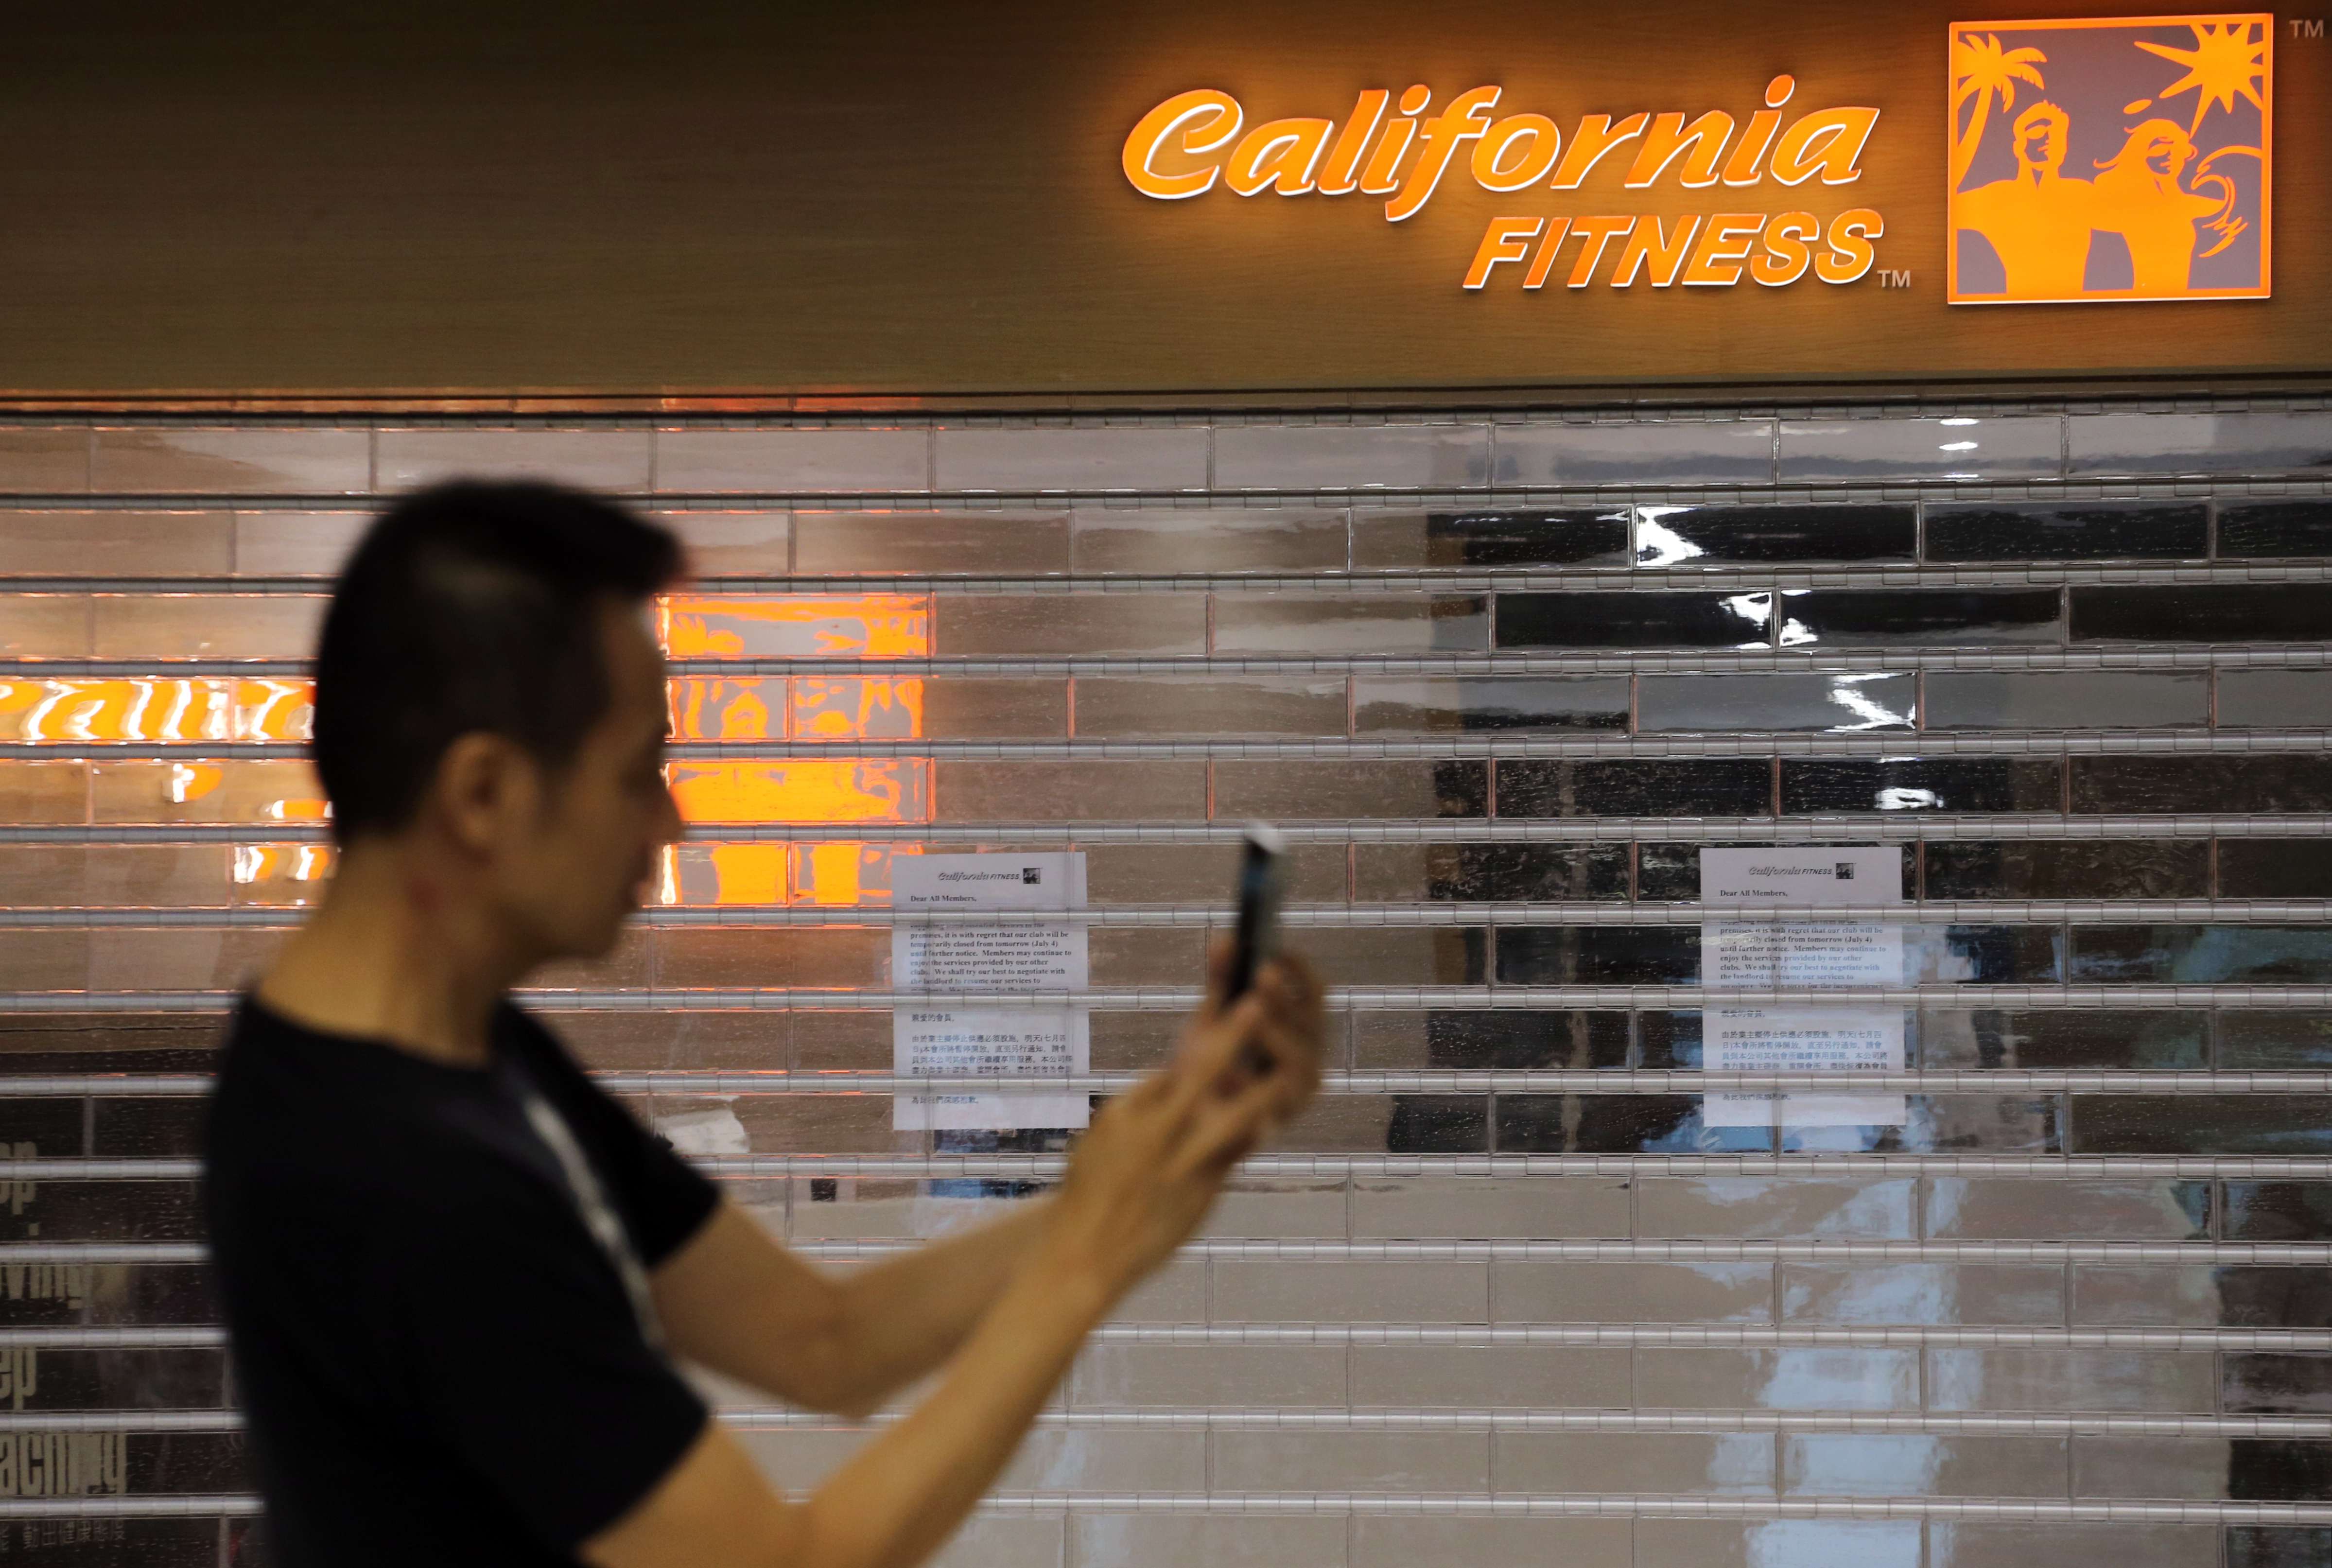 The shuttered California Fitness branch in Hung Hom that sparked fears about the chain’s future. Photo: Felix Wong